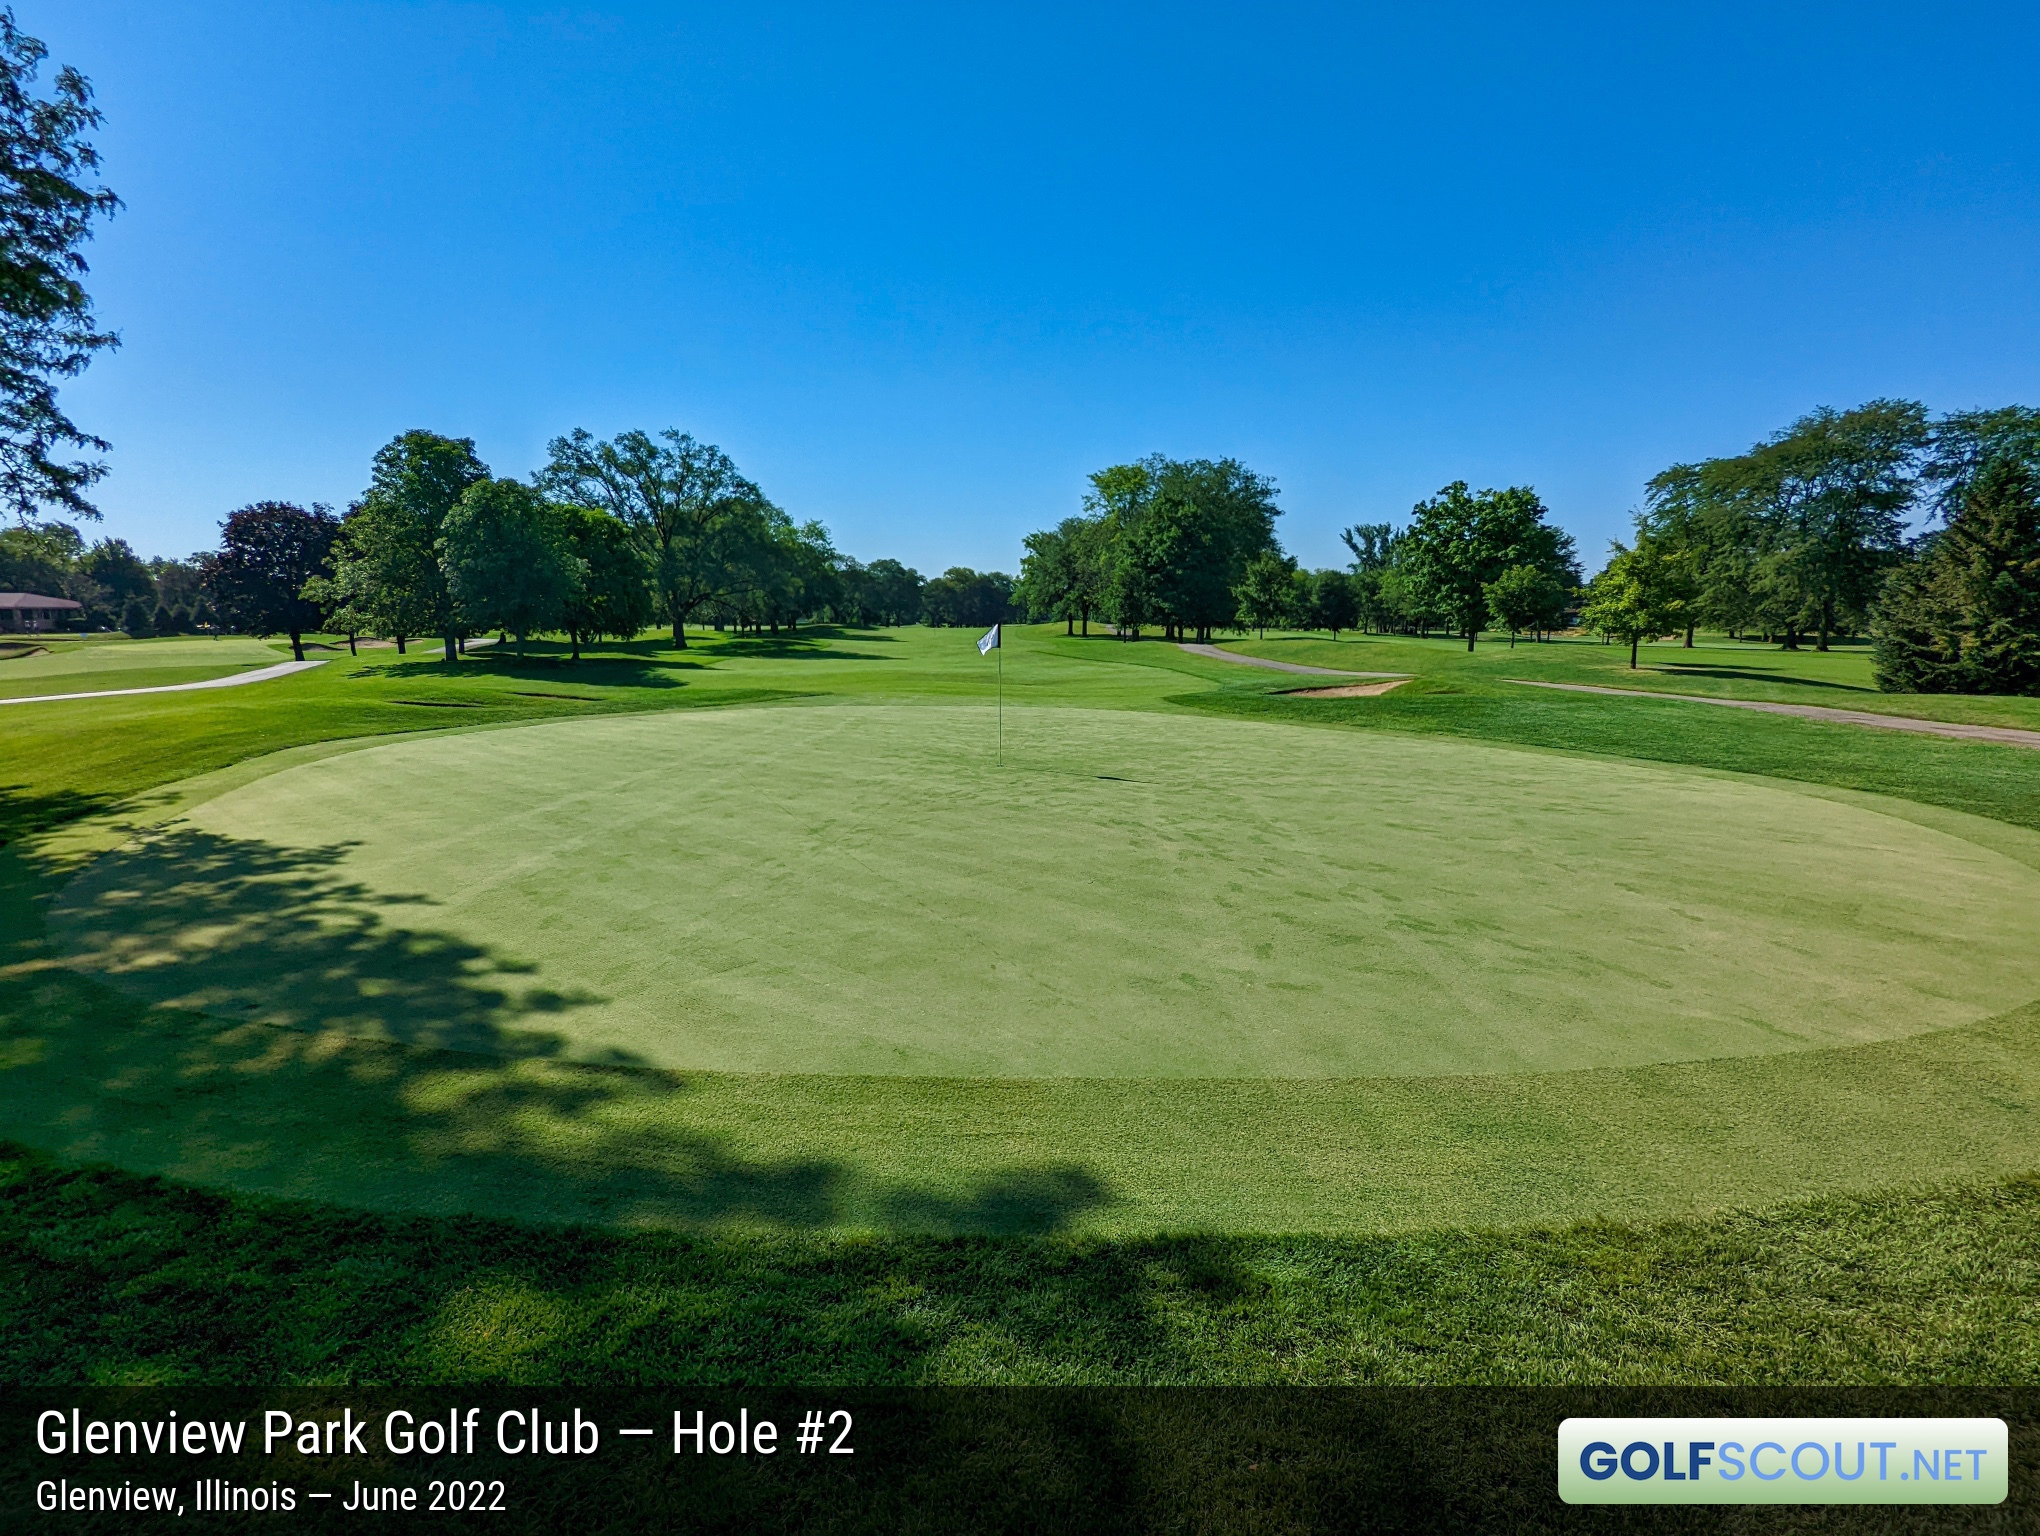 Photo of hole #2 at Glenview Park Golf Club in Glenview, Illinois. 